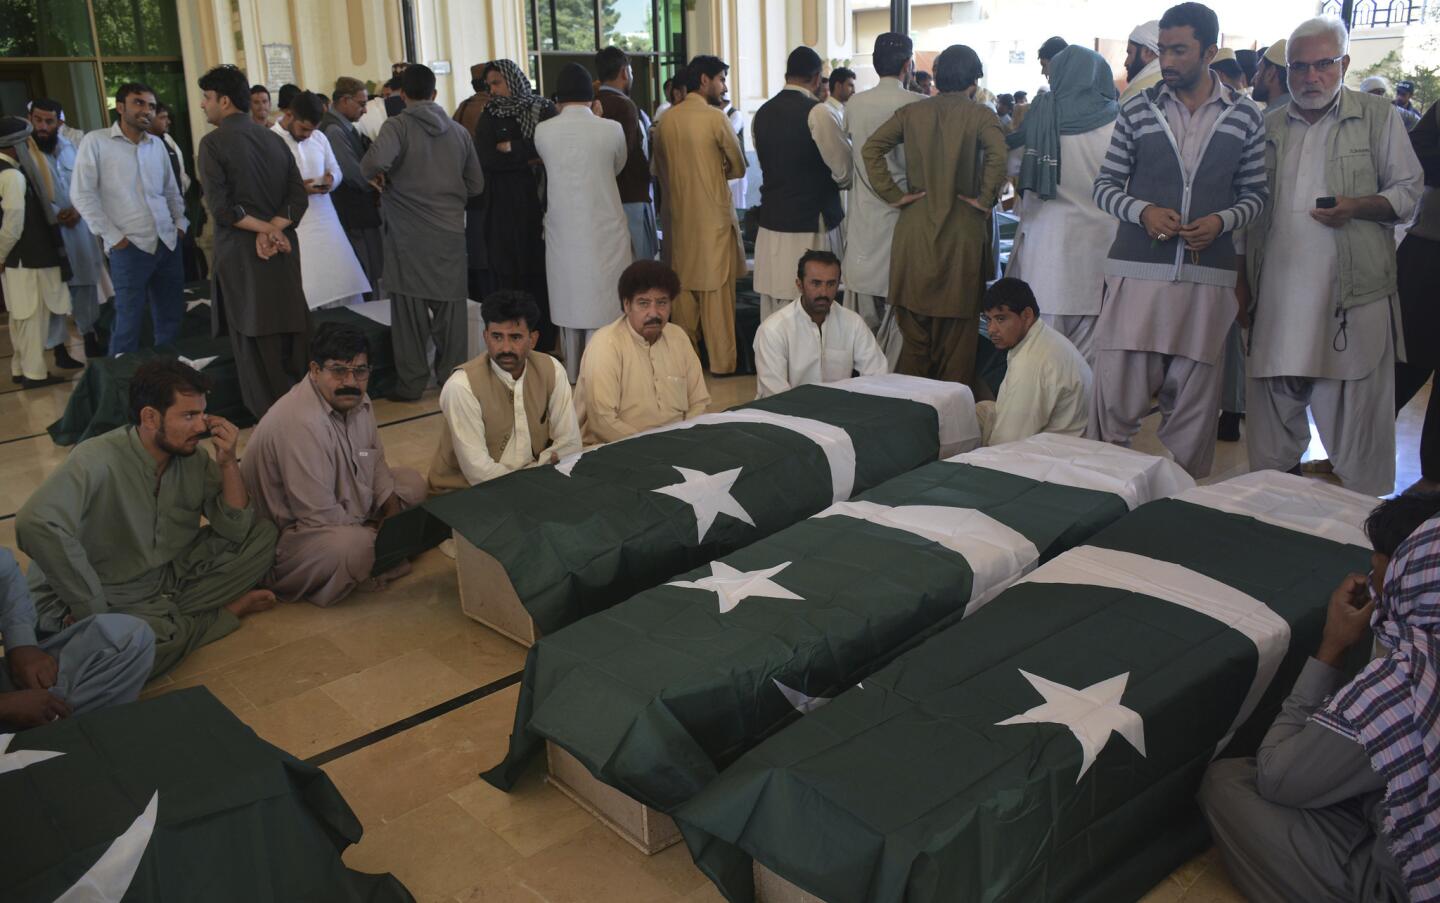 People wait to receive the bodies of family members who died in an attack on the Police Training Academy in Quetta, Pakistan. Militants wearing suicide vests stormed the Pakistani police academy overnight, killing dozens of people, mostly police cadets and recruits.